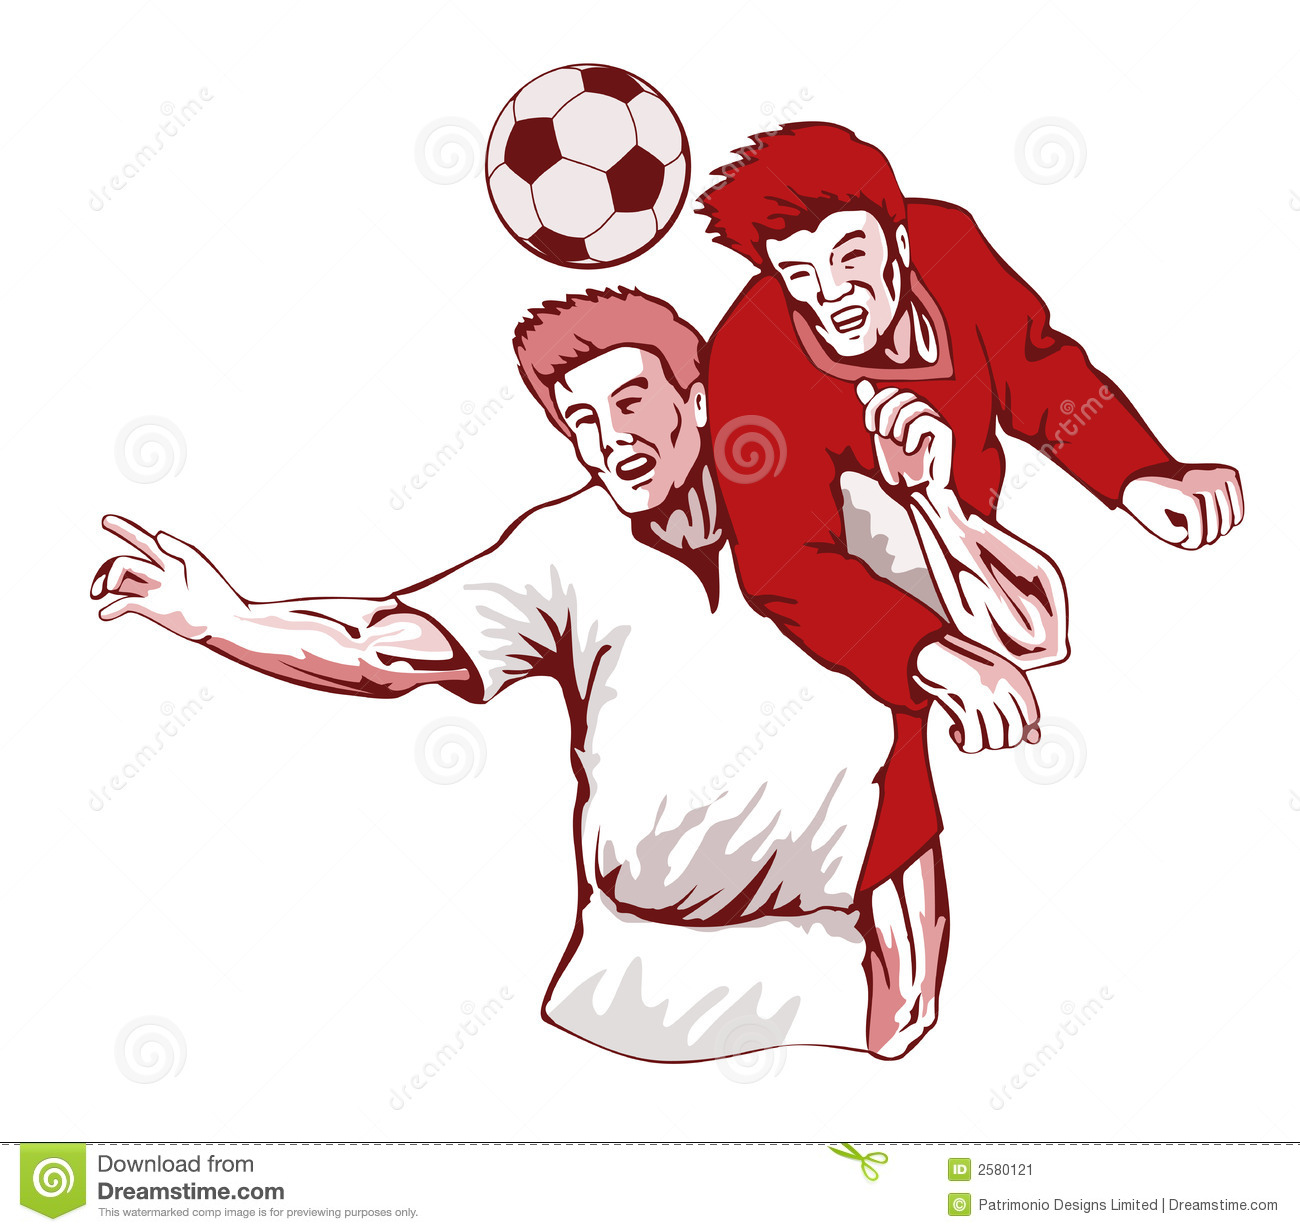 Soccer Player Heading Ball Stock Photos, Images, & Pictures.